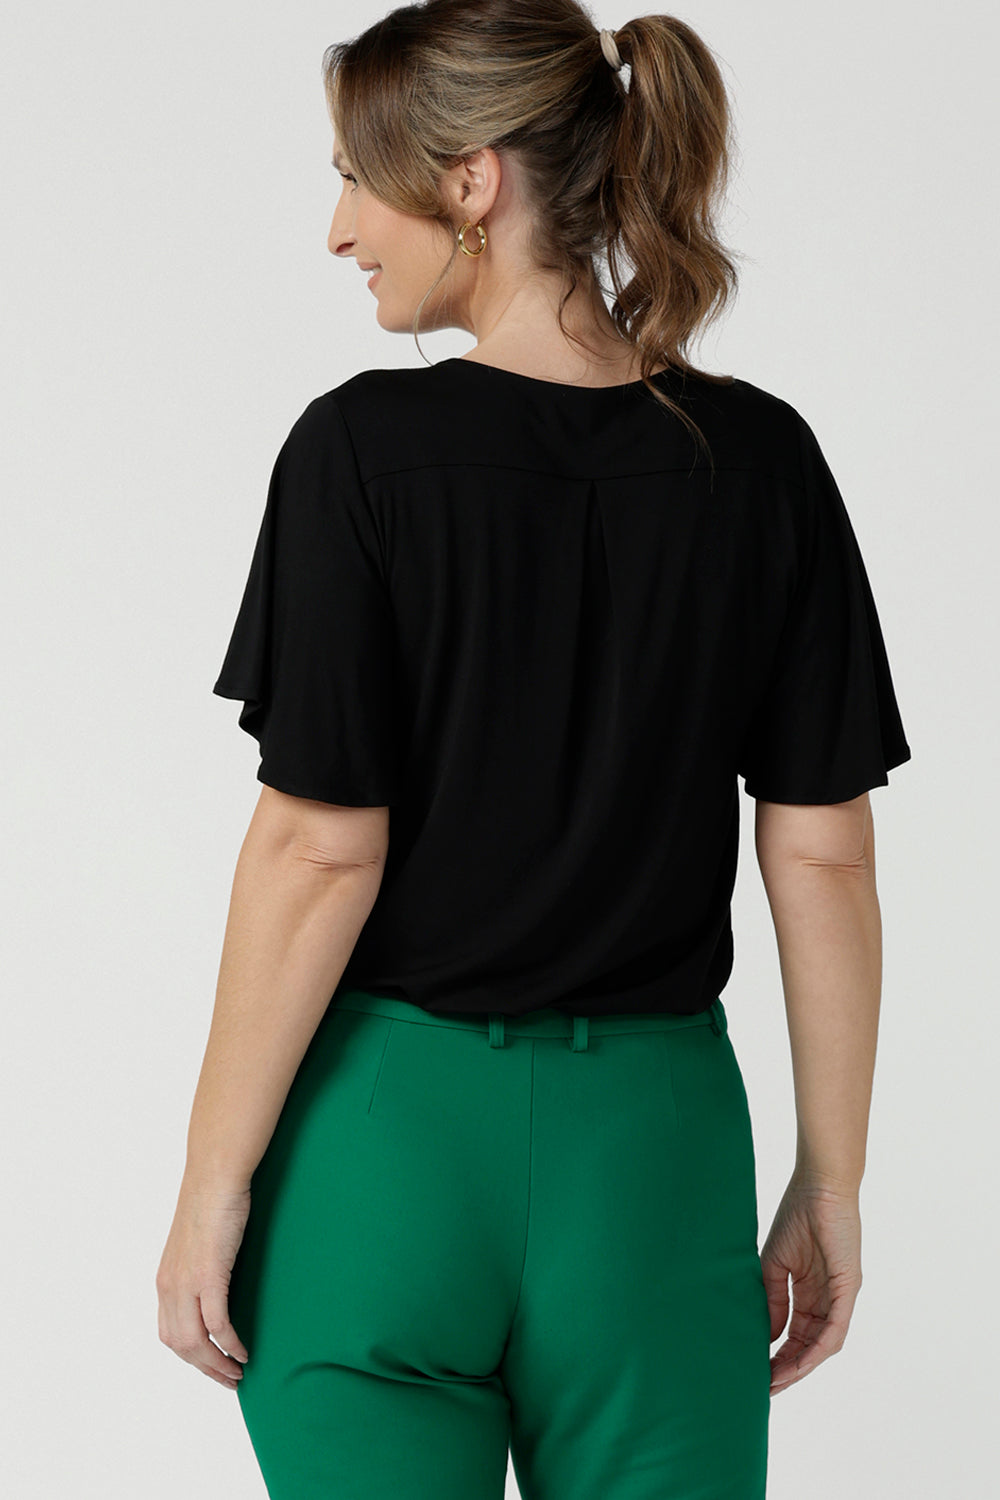 Back view of a flutter sleeve, black top for work and casual wear, this tailored top is worn by a size 10, 40 plus woman. Made in Australia, shop women's black tops online at Australian and New Zealand women's clothing brand, Leina & Fleur.